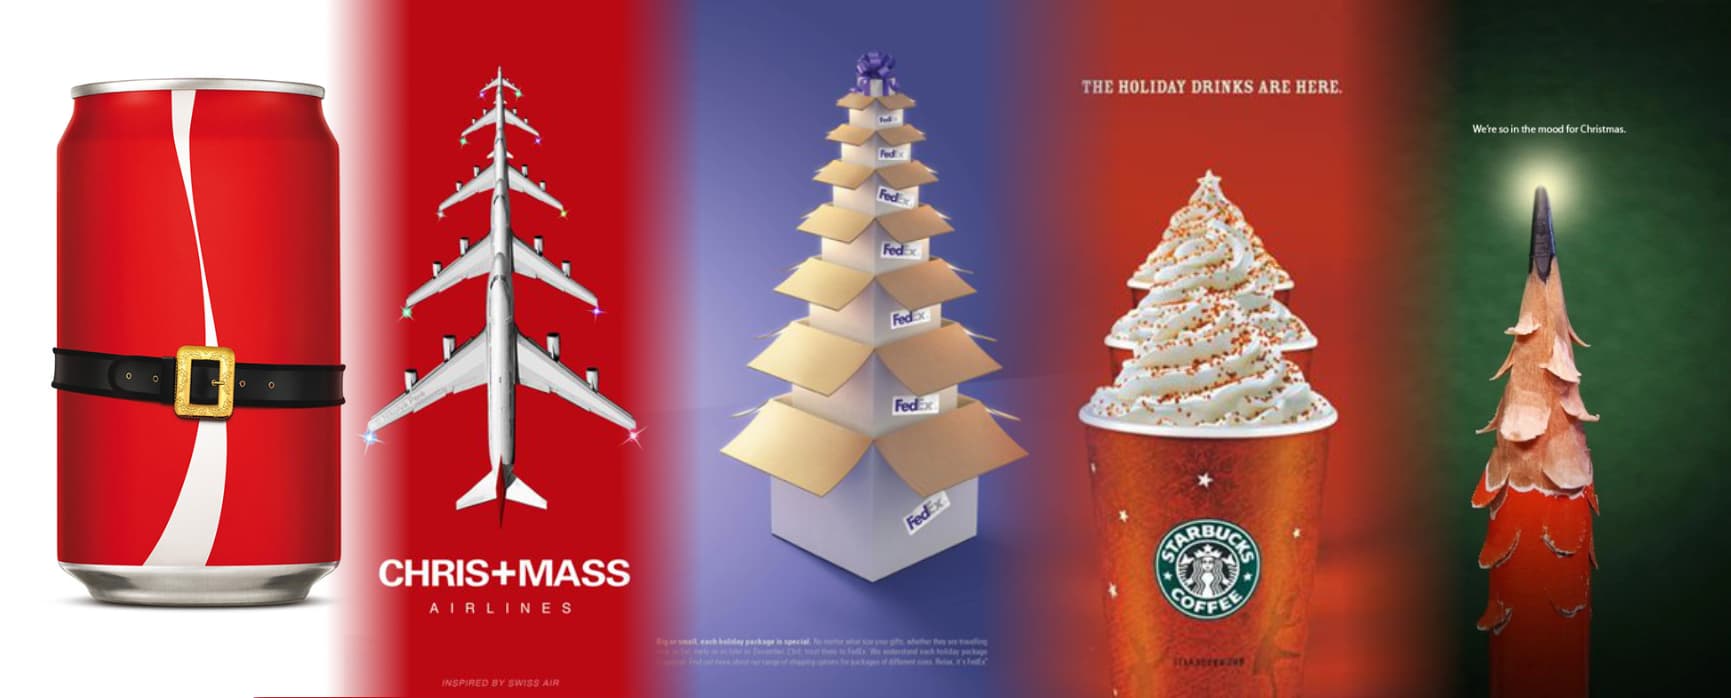 An image showing 5 different clips from popular TV Christmas ads